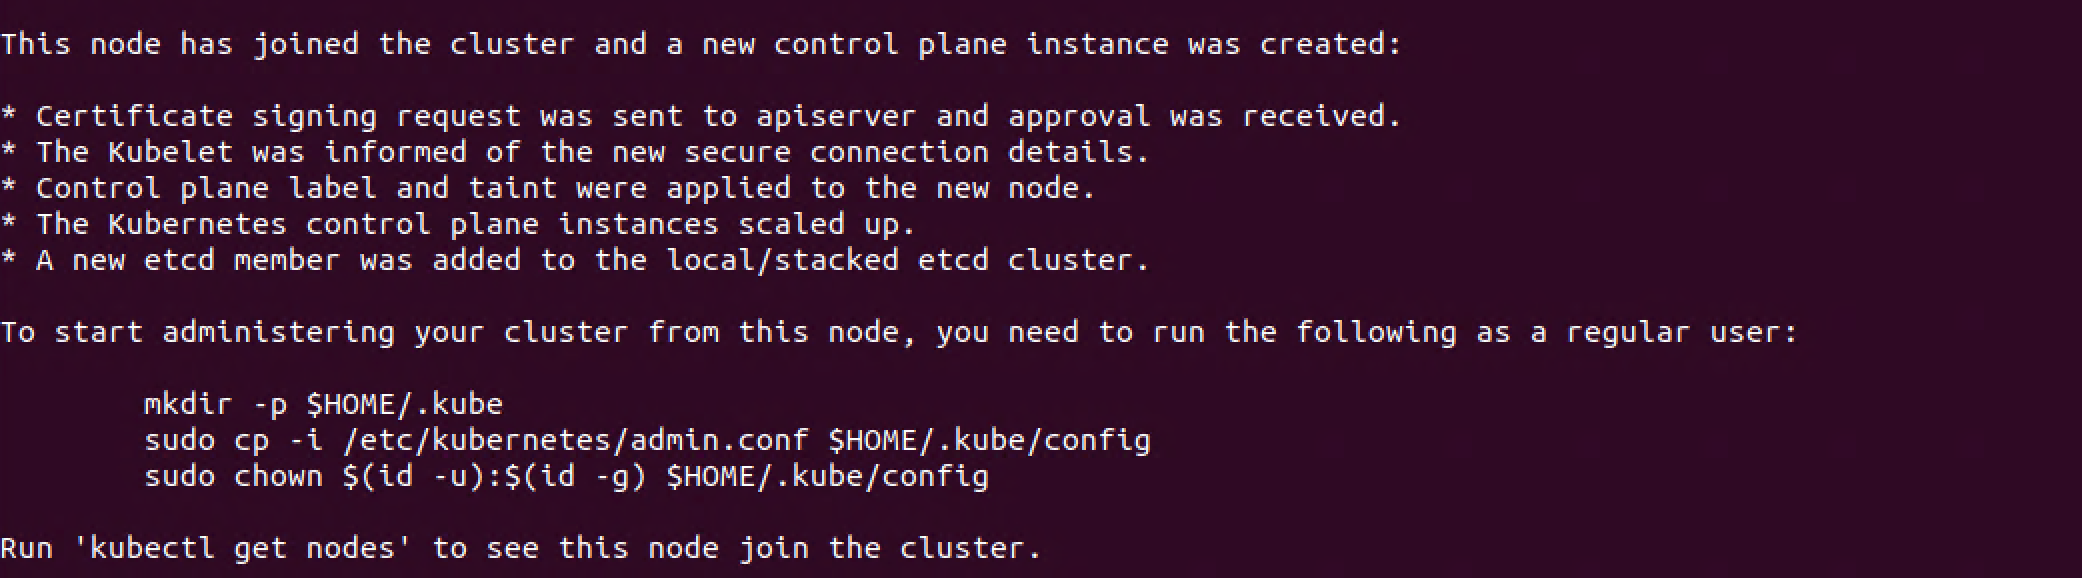 New control plane node joined to the cluster